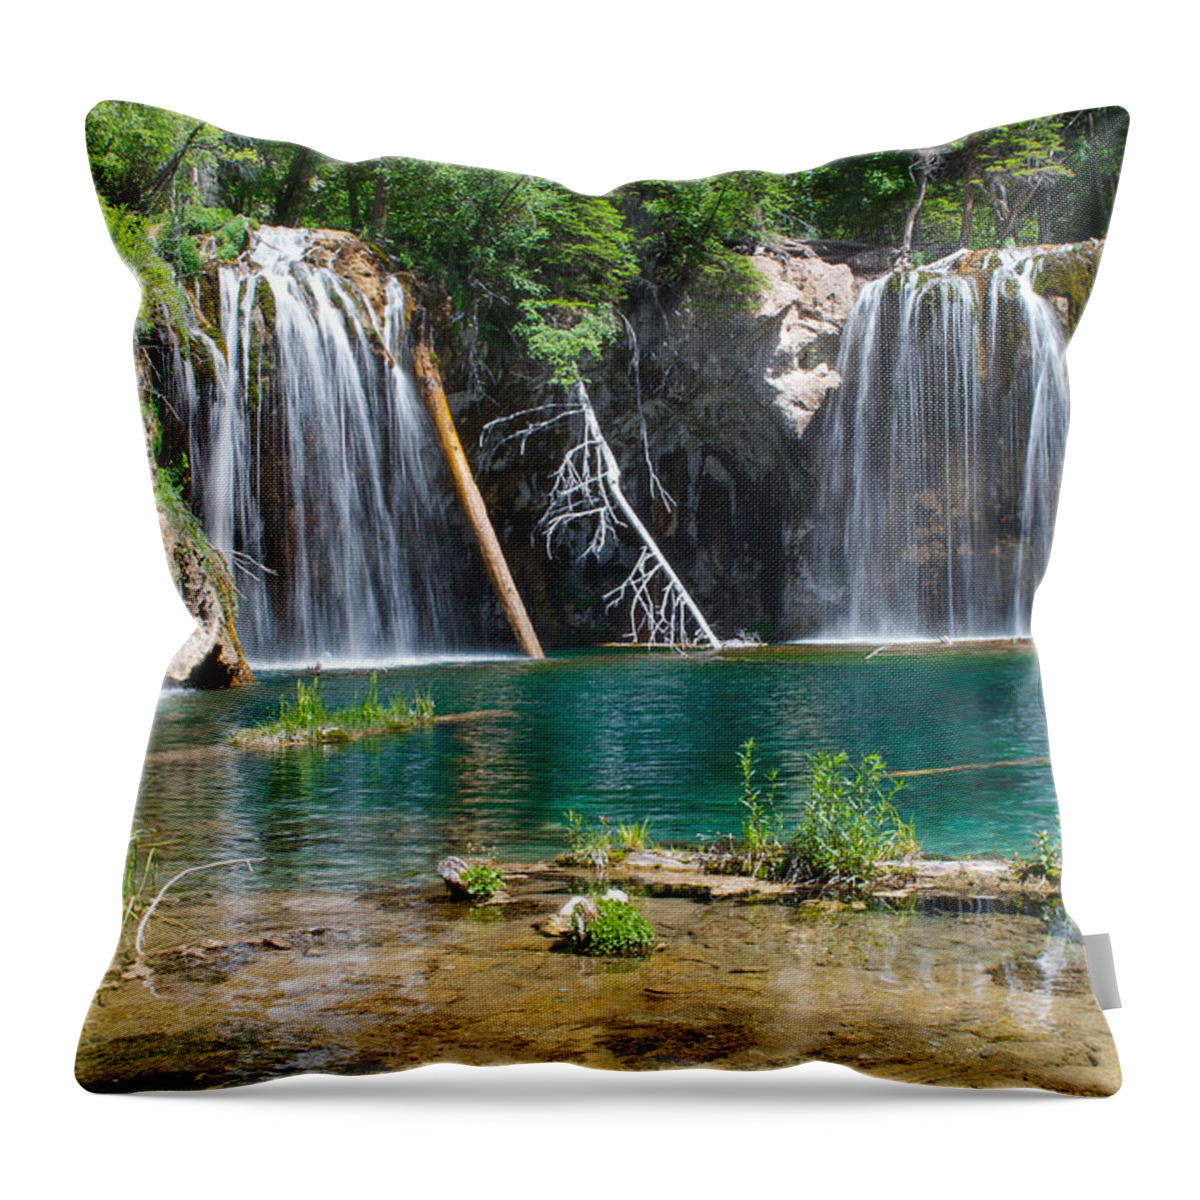 Hanging Throw Pillow featuring the photograph Hanging Lake - Colorado by Aaron Spong